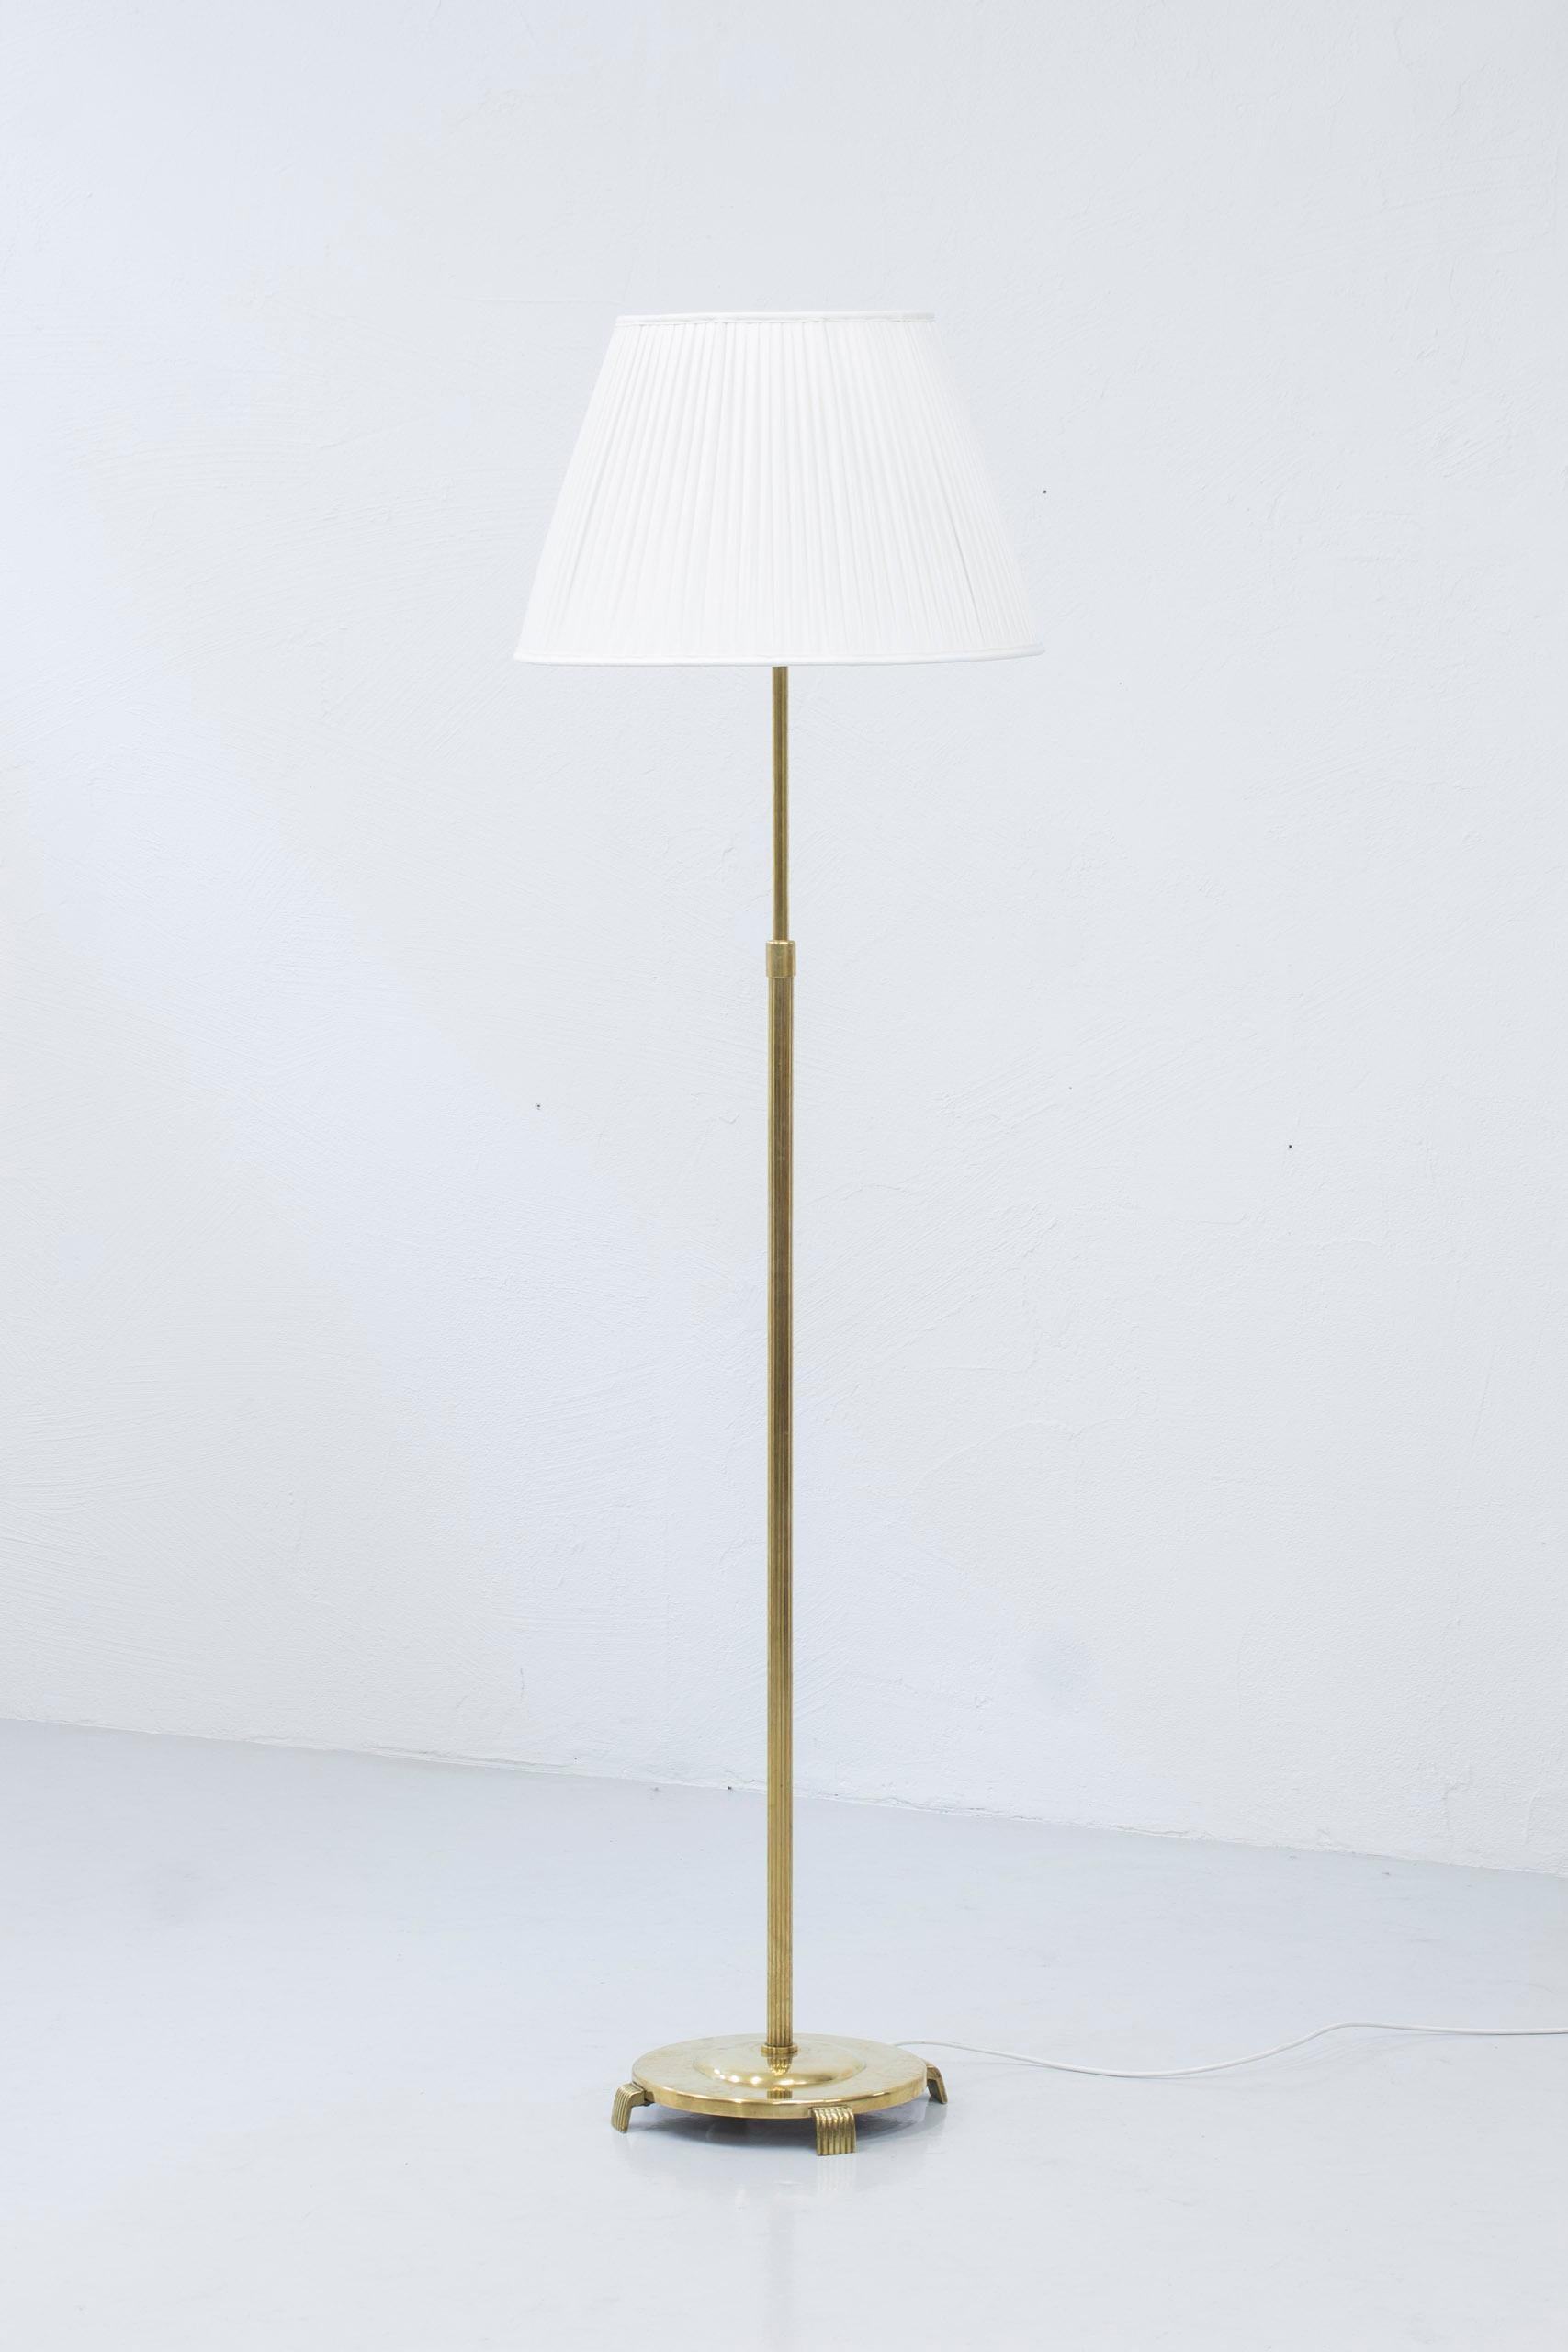 Floor lamp model 32753 produced by Nordiska Kompaniet. Attributed to the head designer for the NK lighting department Bertil Brisborg. Designed during the late 1930s and made ca 1930-40s. Made from brass, lacquered metal and leather. The shade is